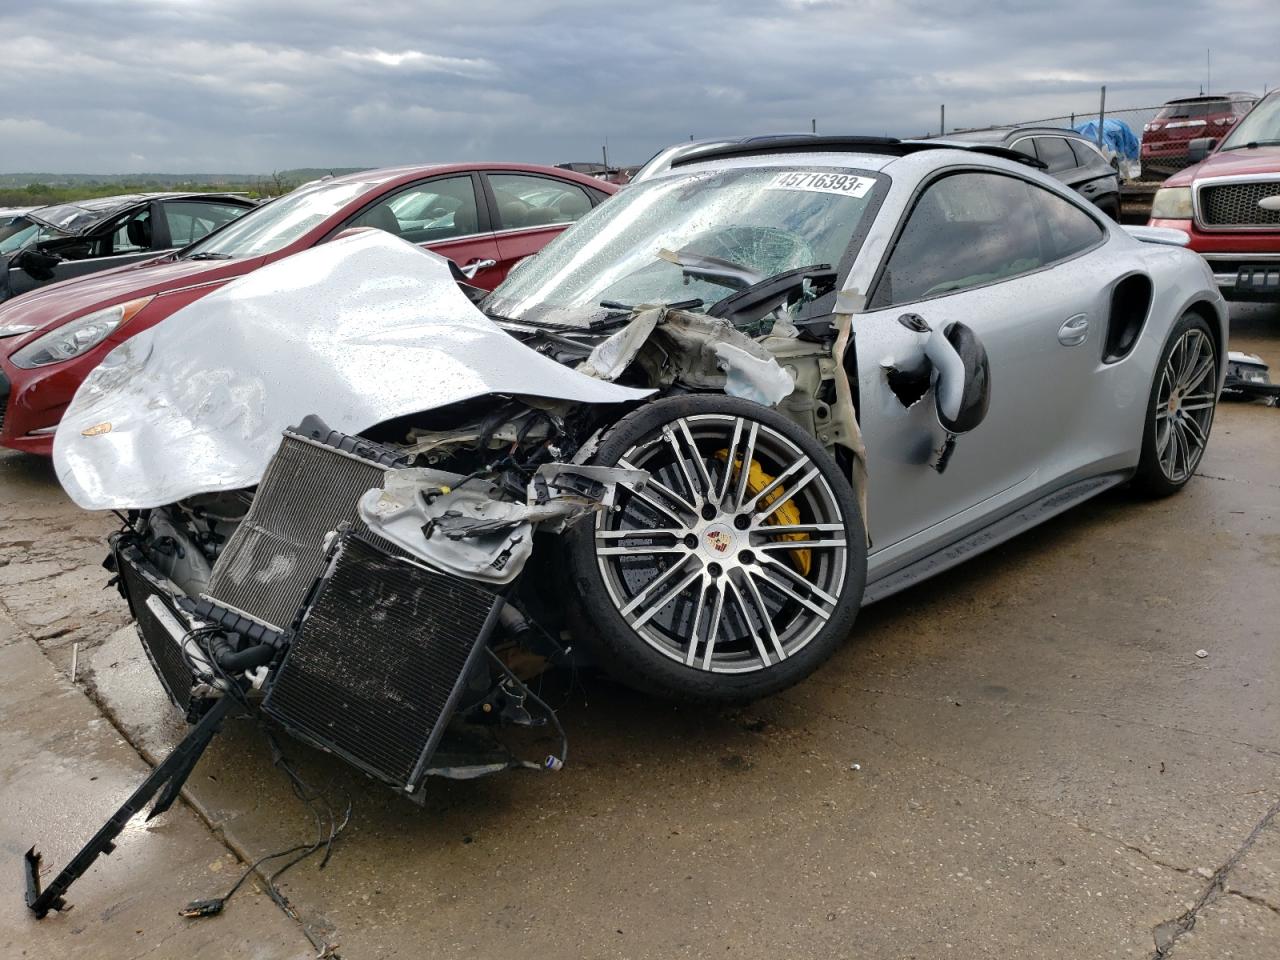 Wrecked & Salvage Porsche for Sale in Indiana: Damaged, Repairable Cars  Auction 